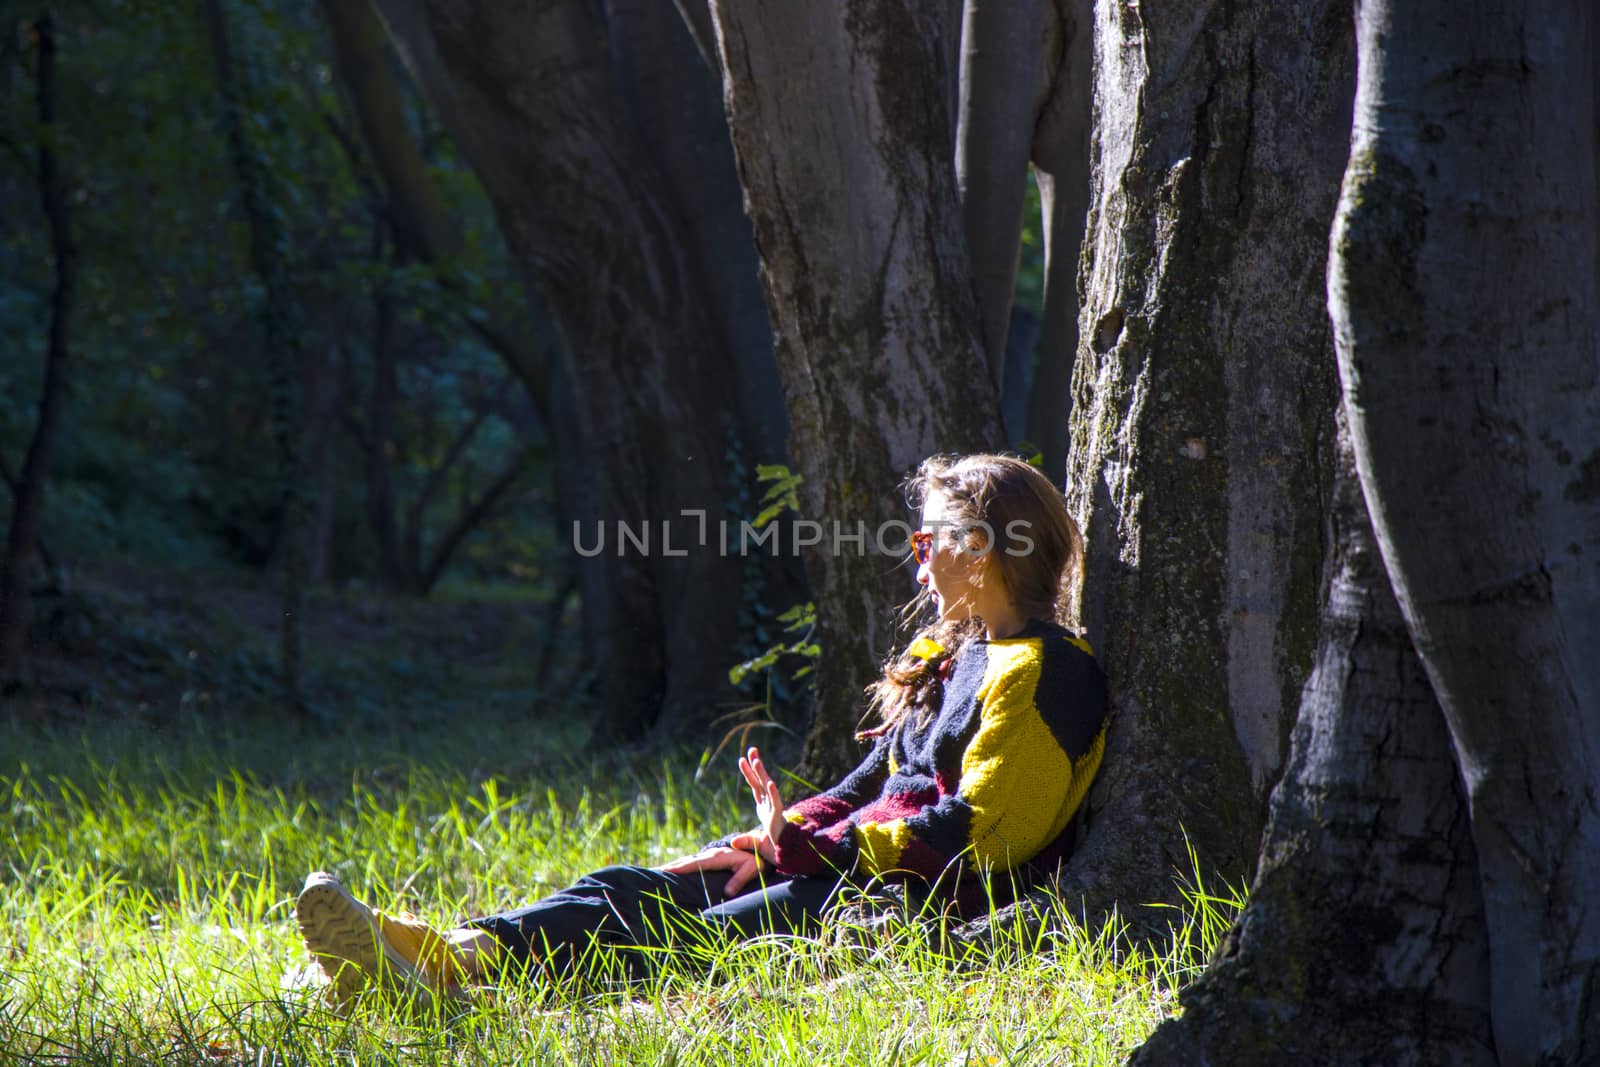 Woman in the botanic garden and park, trees and casual young girl portrait in garden